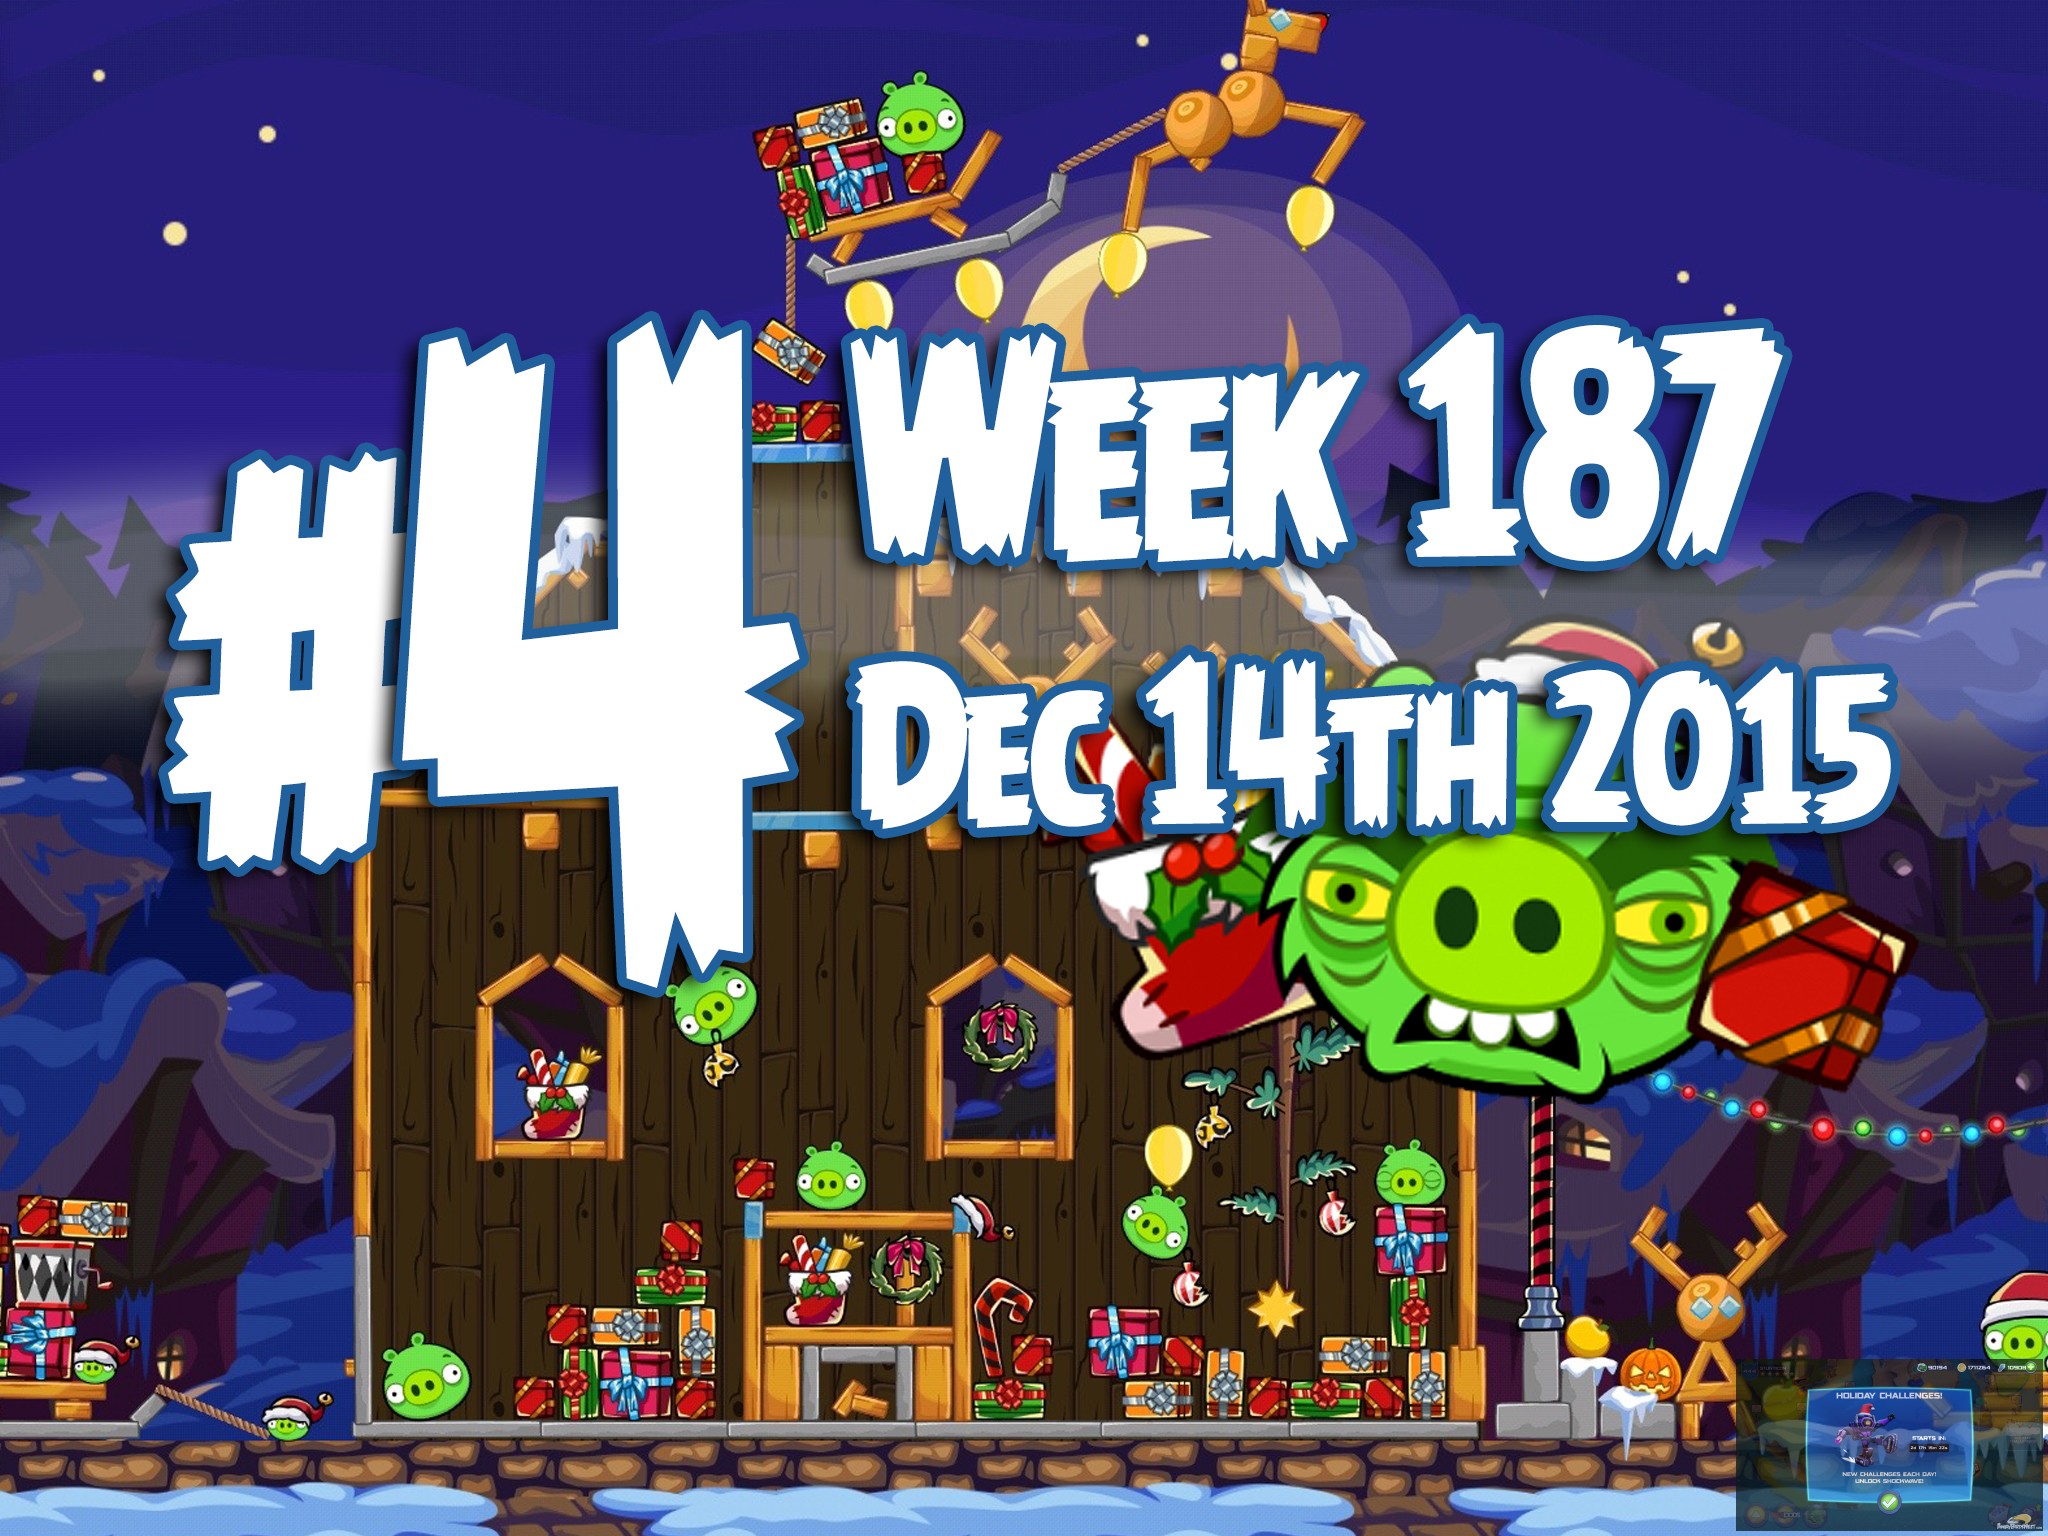 Angry Birds Friends Week 187 Level 4